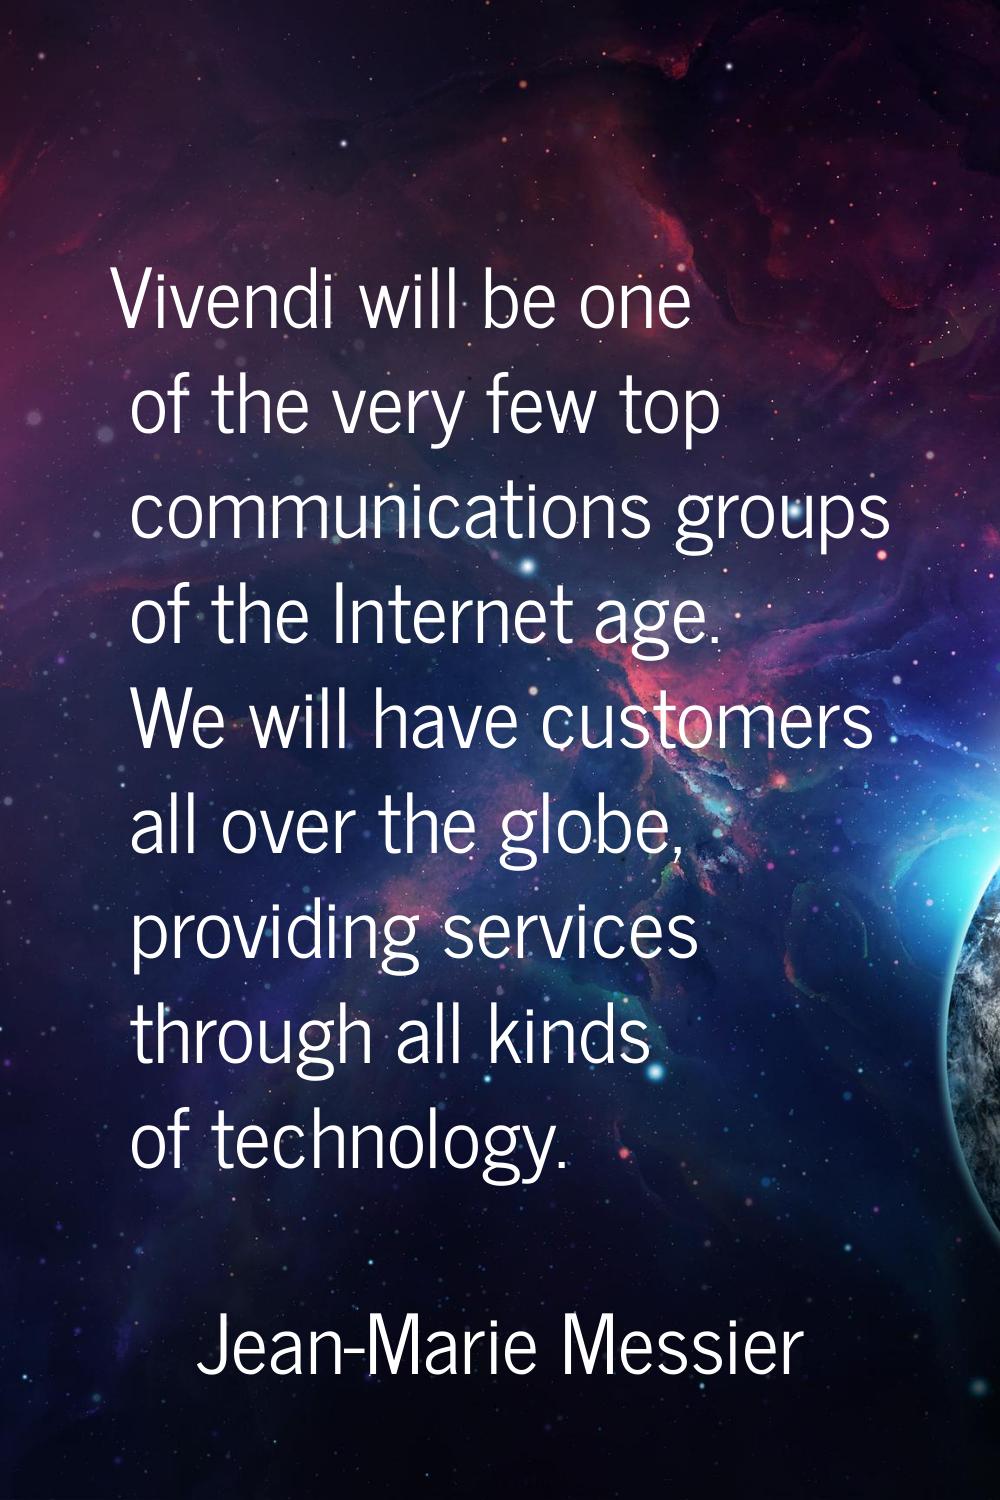 Vivendi will be one of the very few top communications groups of the Internet age. We will have cus